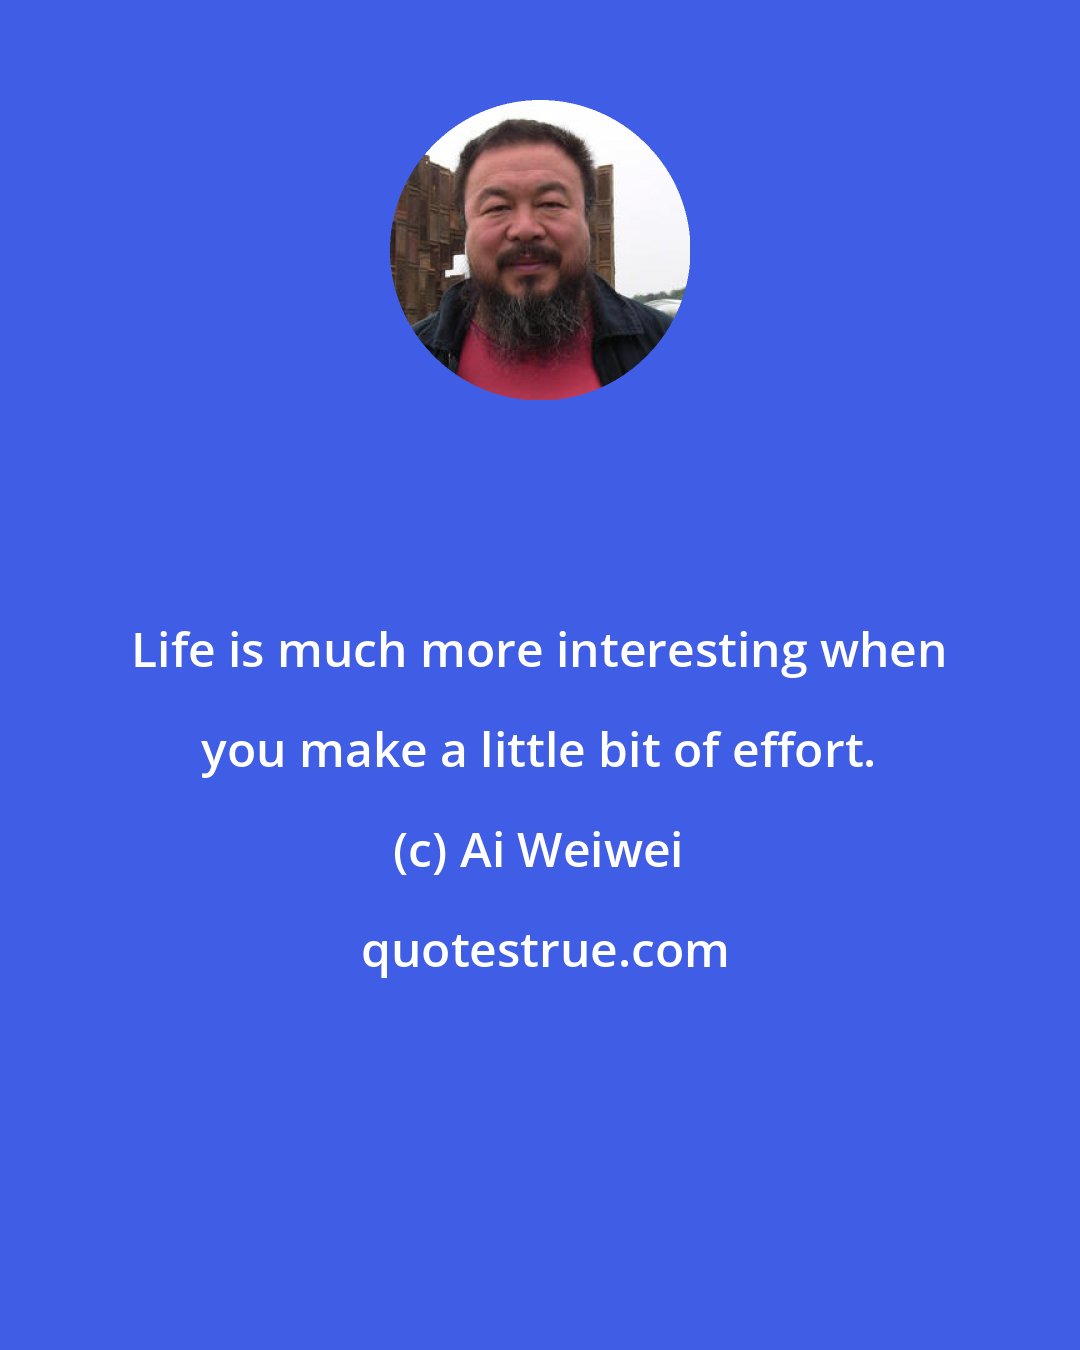 Ai Weiwei: Life is much more interesting when you make a little bit of effort.